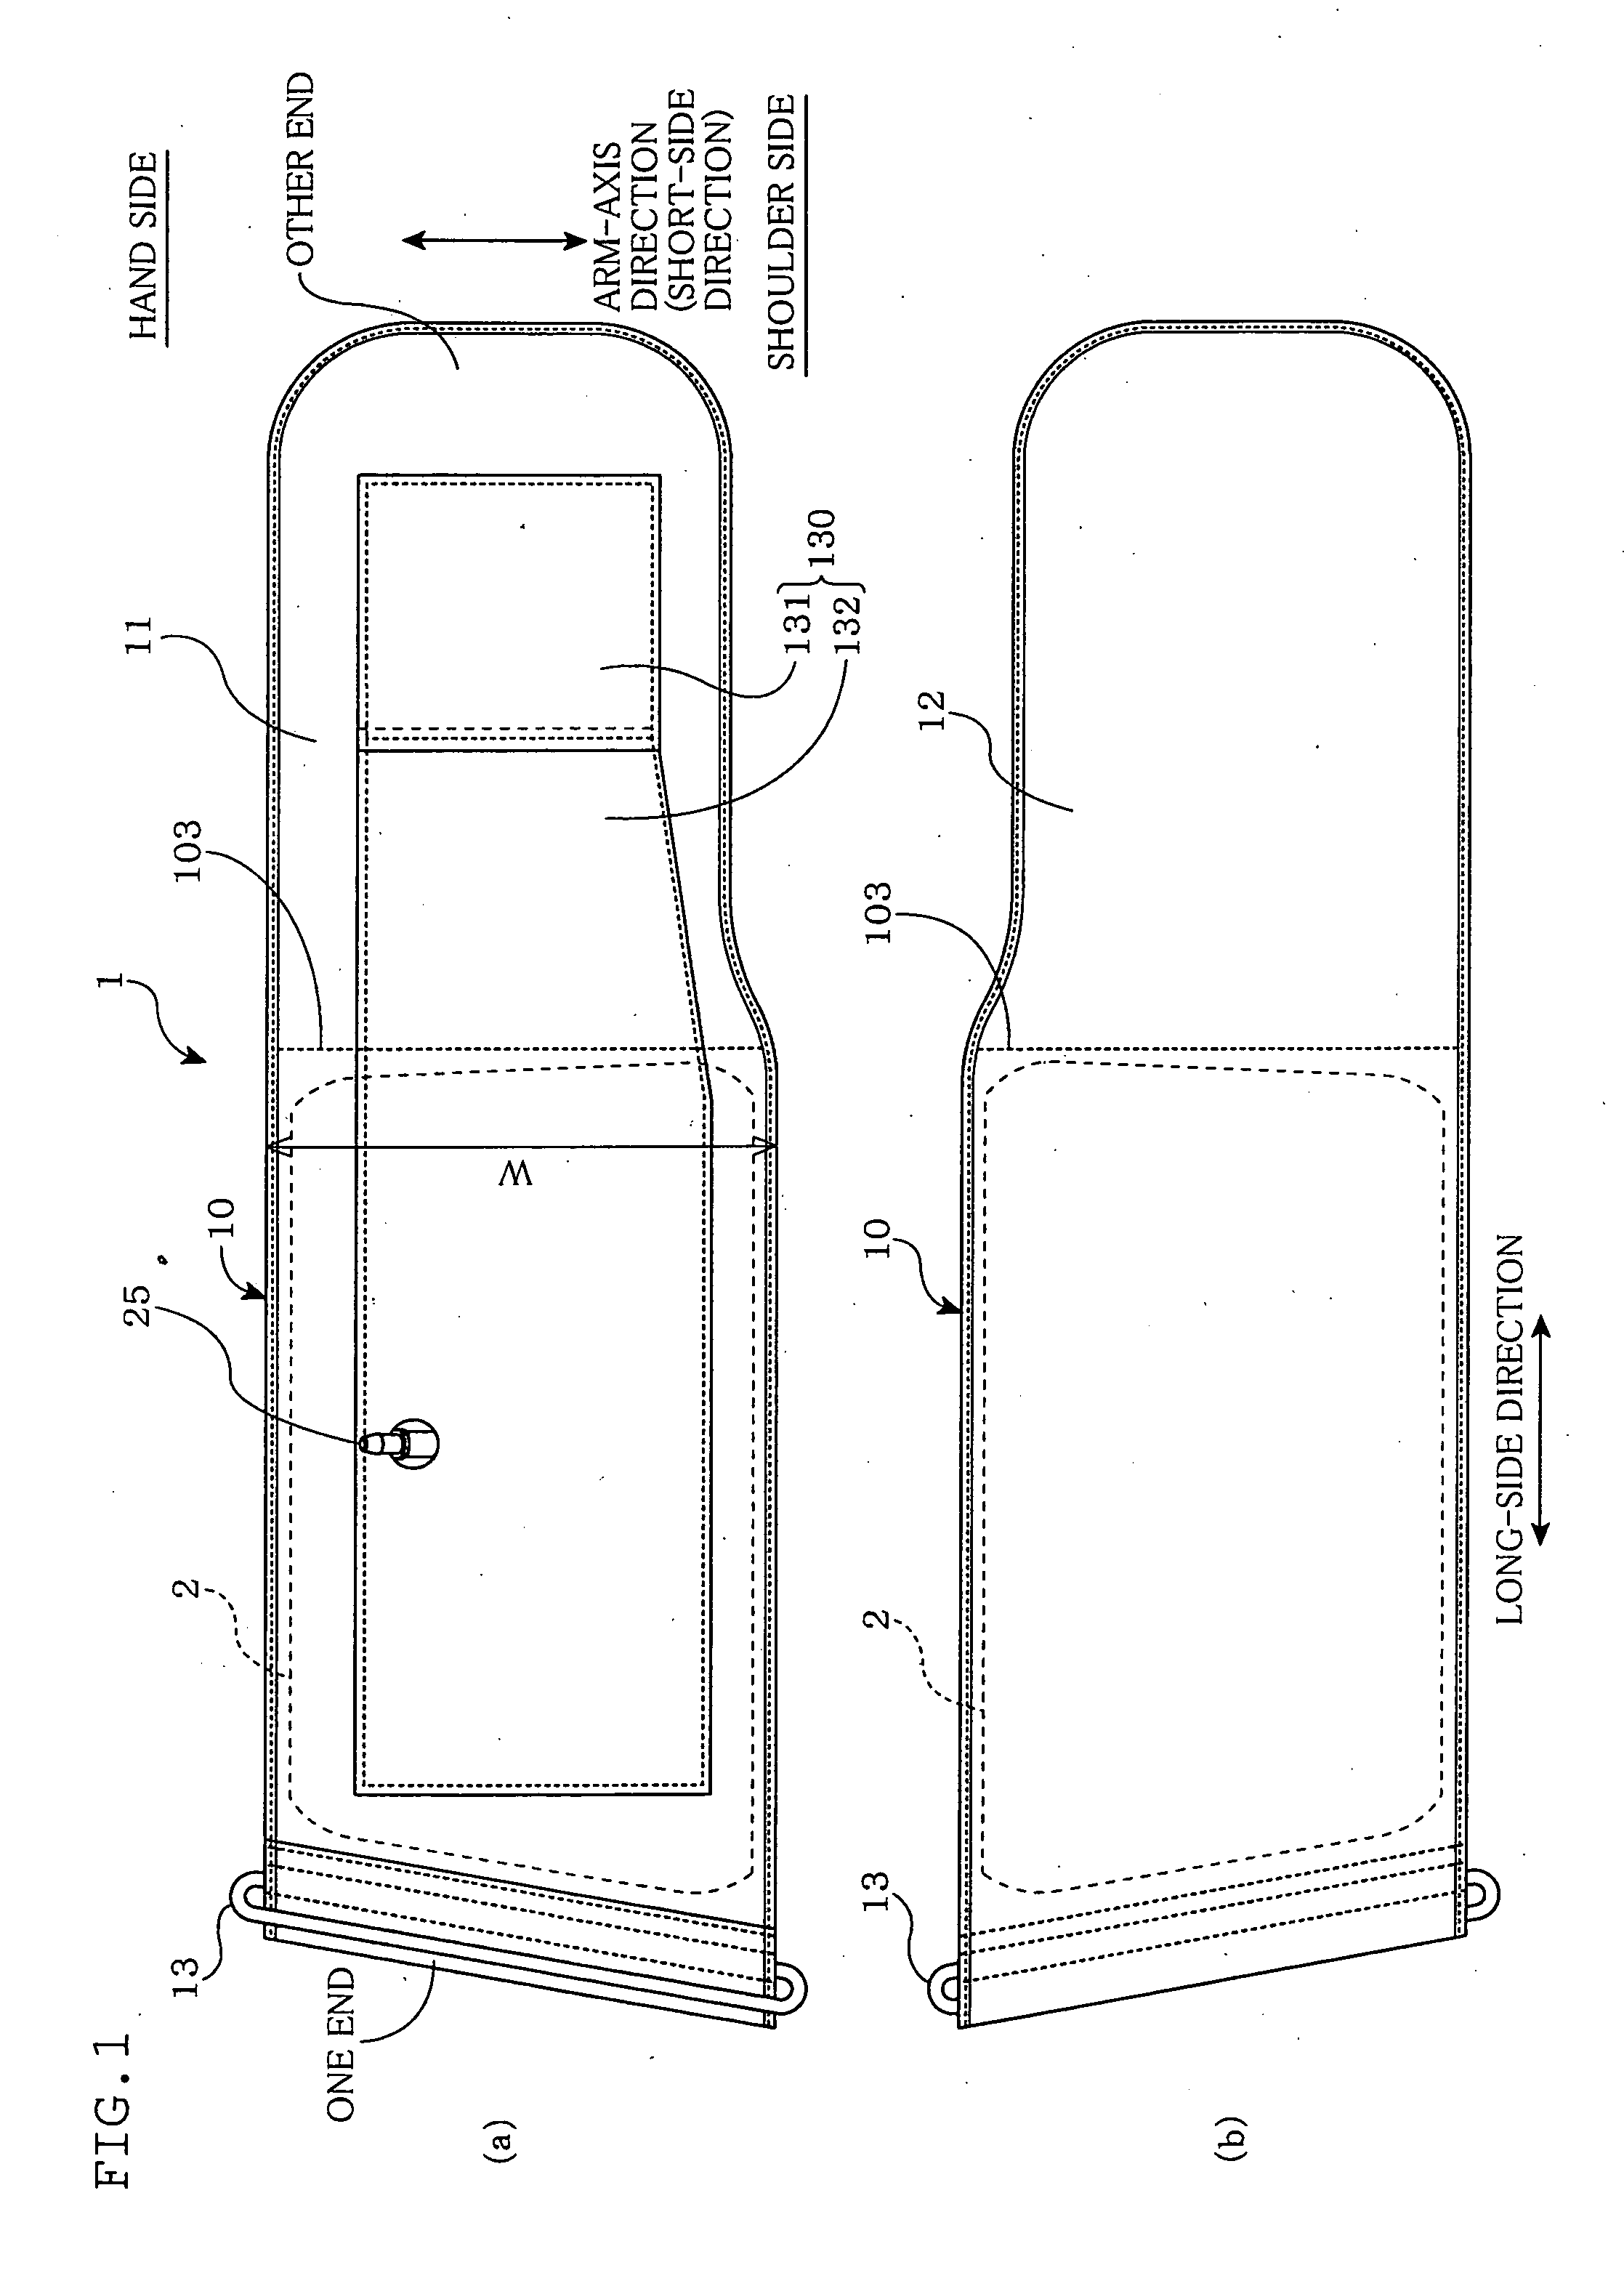 Living body pressing device, method of manufacturing same, and blood pressure measuring device